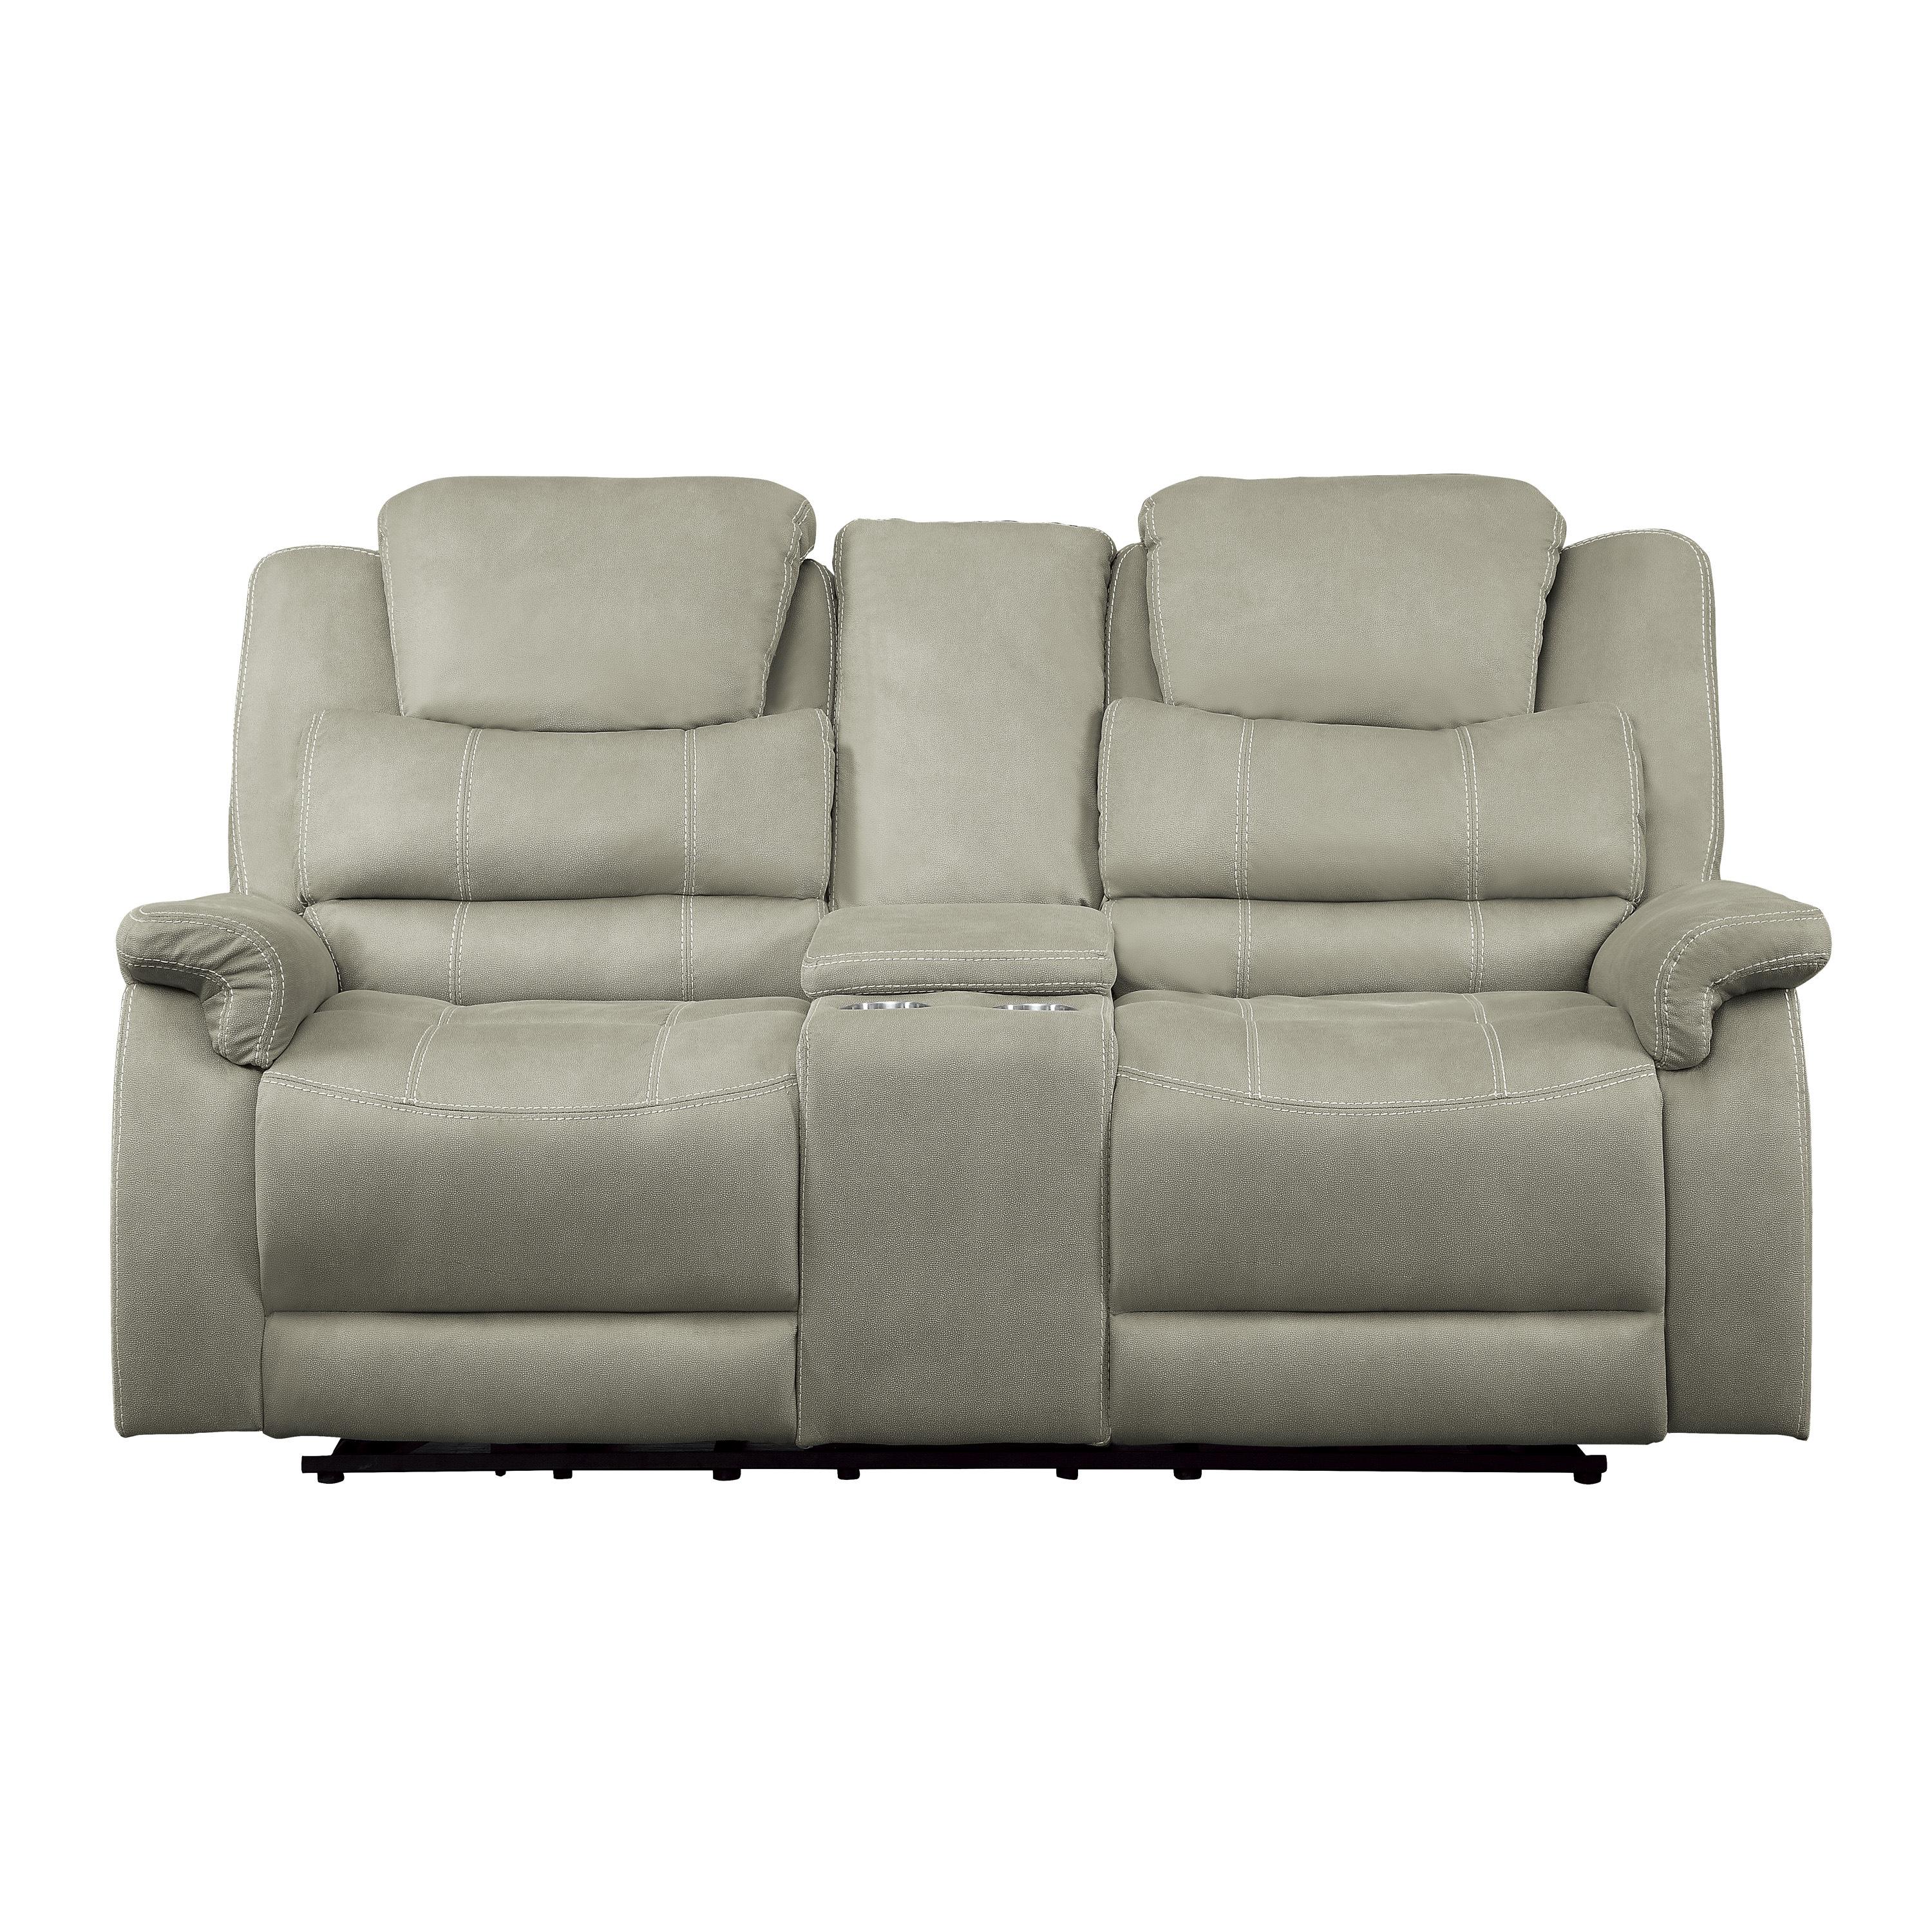 Transitional Power Reclining Loveseat 9848GY-2PWH Shola 9848GY-2PWH in Gray Microfiber